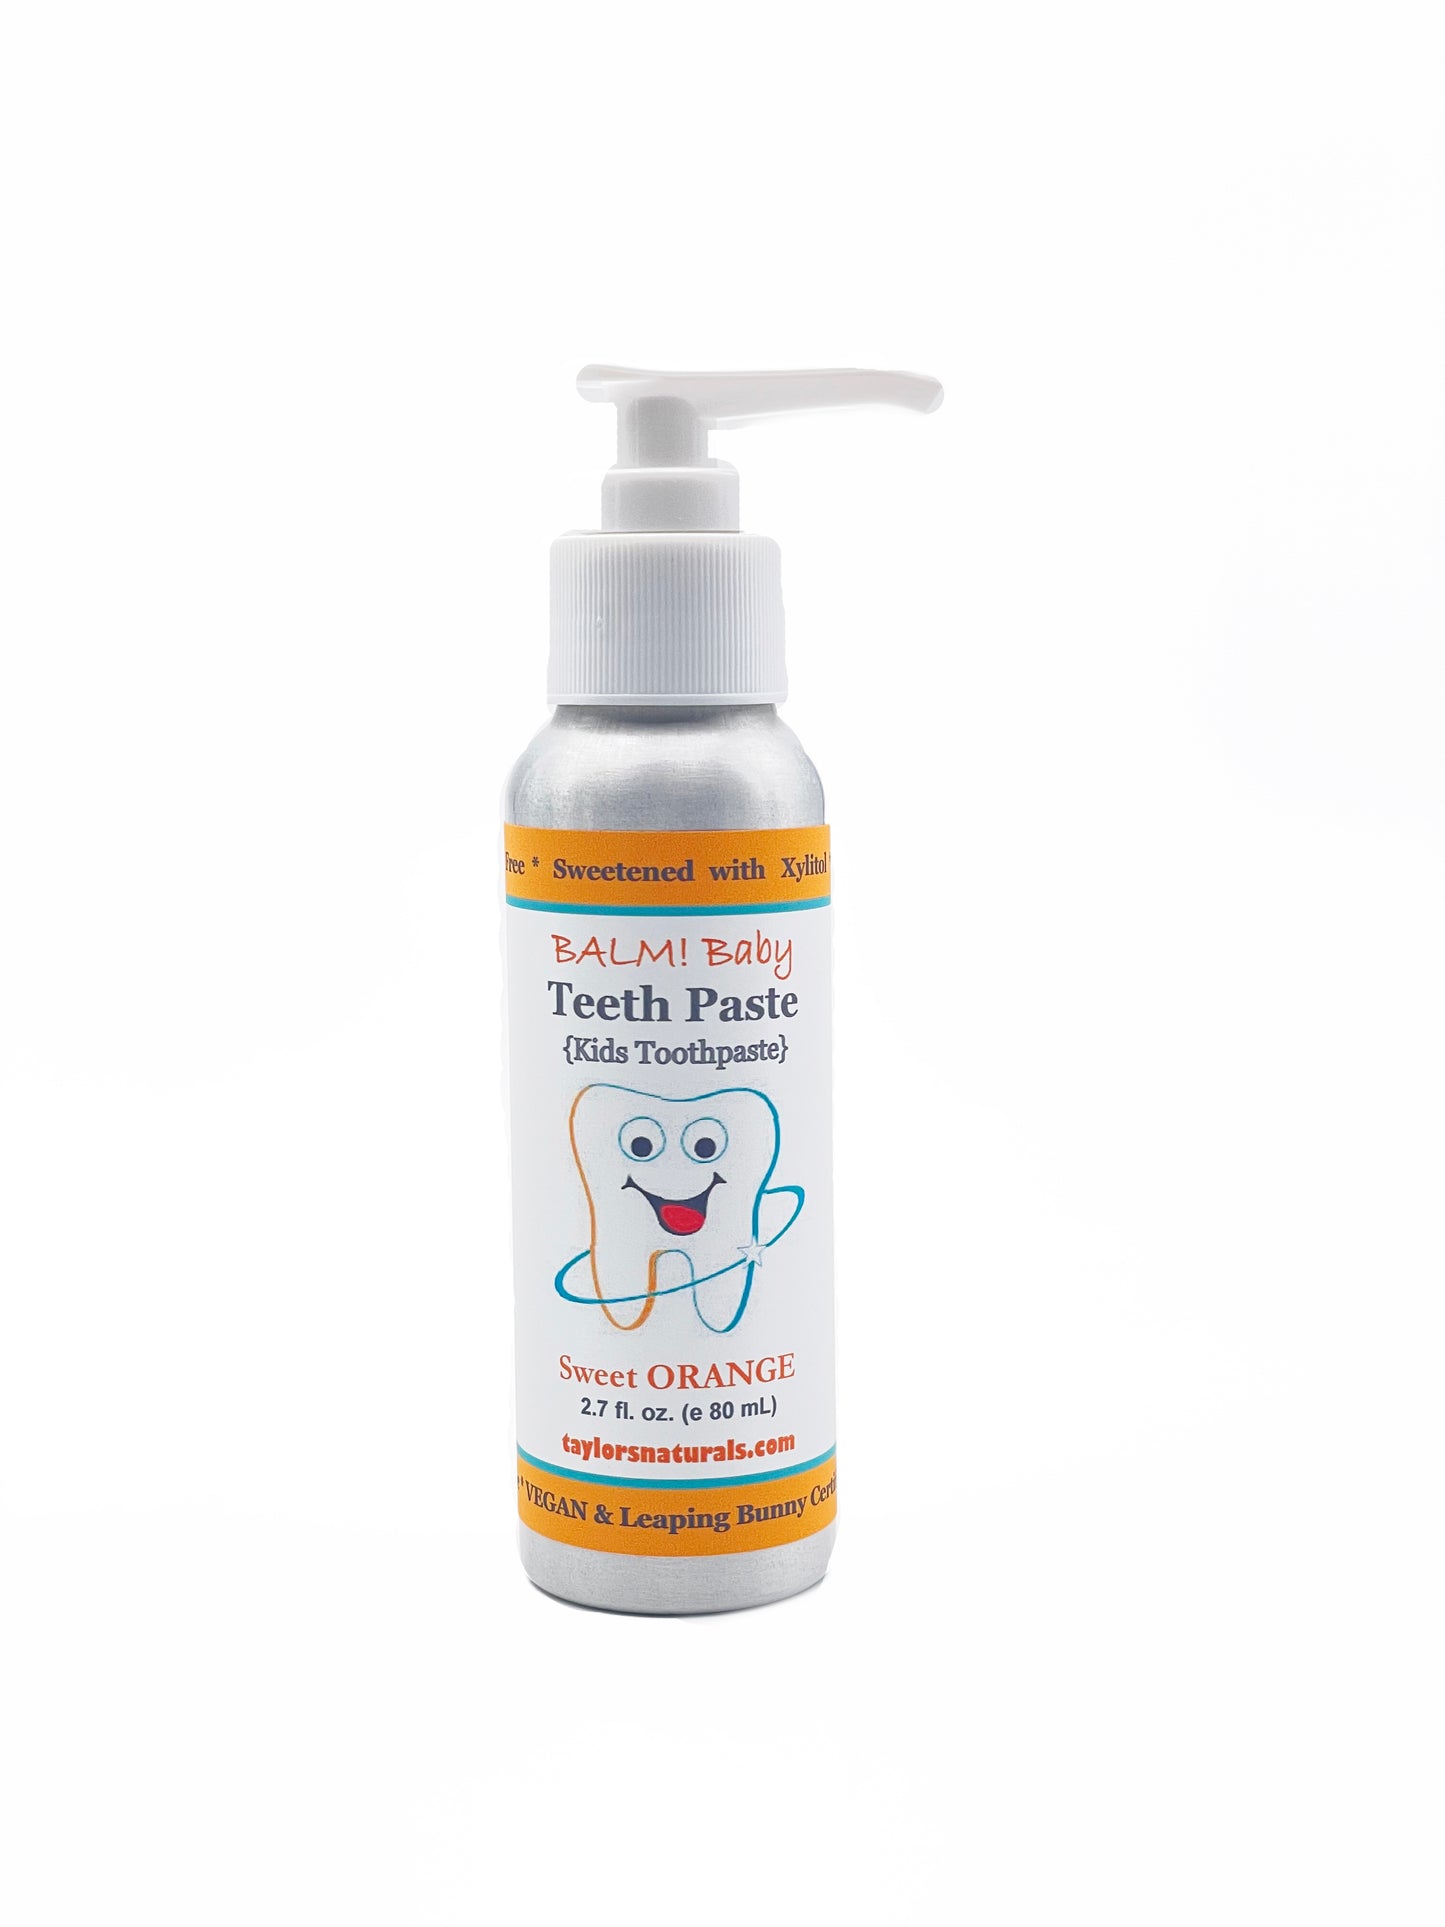 BALM! Baby - Teeth Paste Natural Kids Toothpaste w/ xylitol - Recycled Aluminum w/ Pump